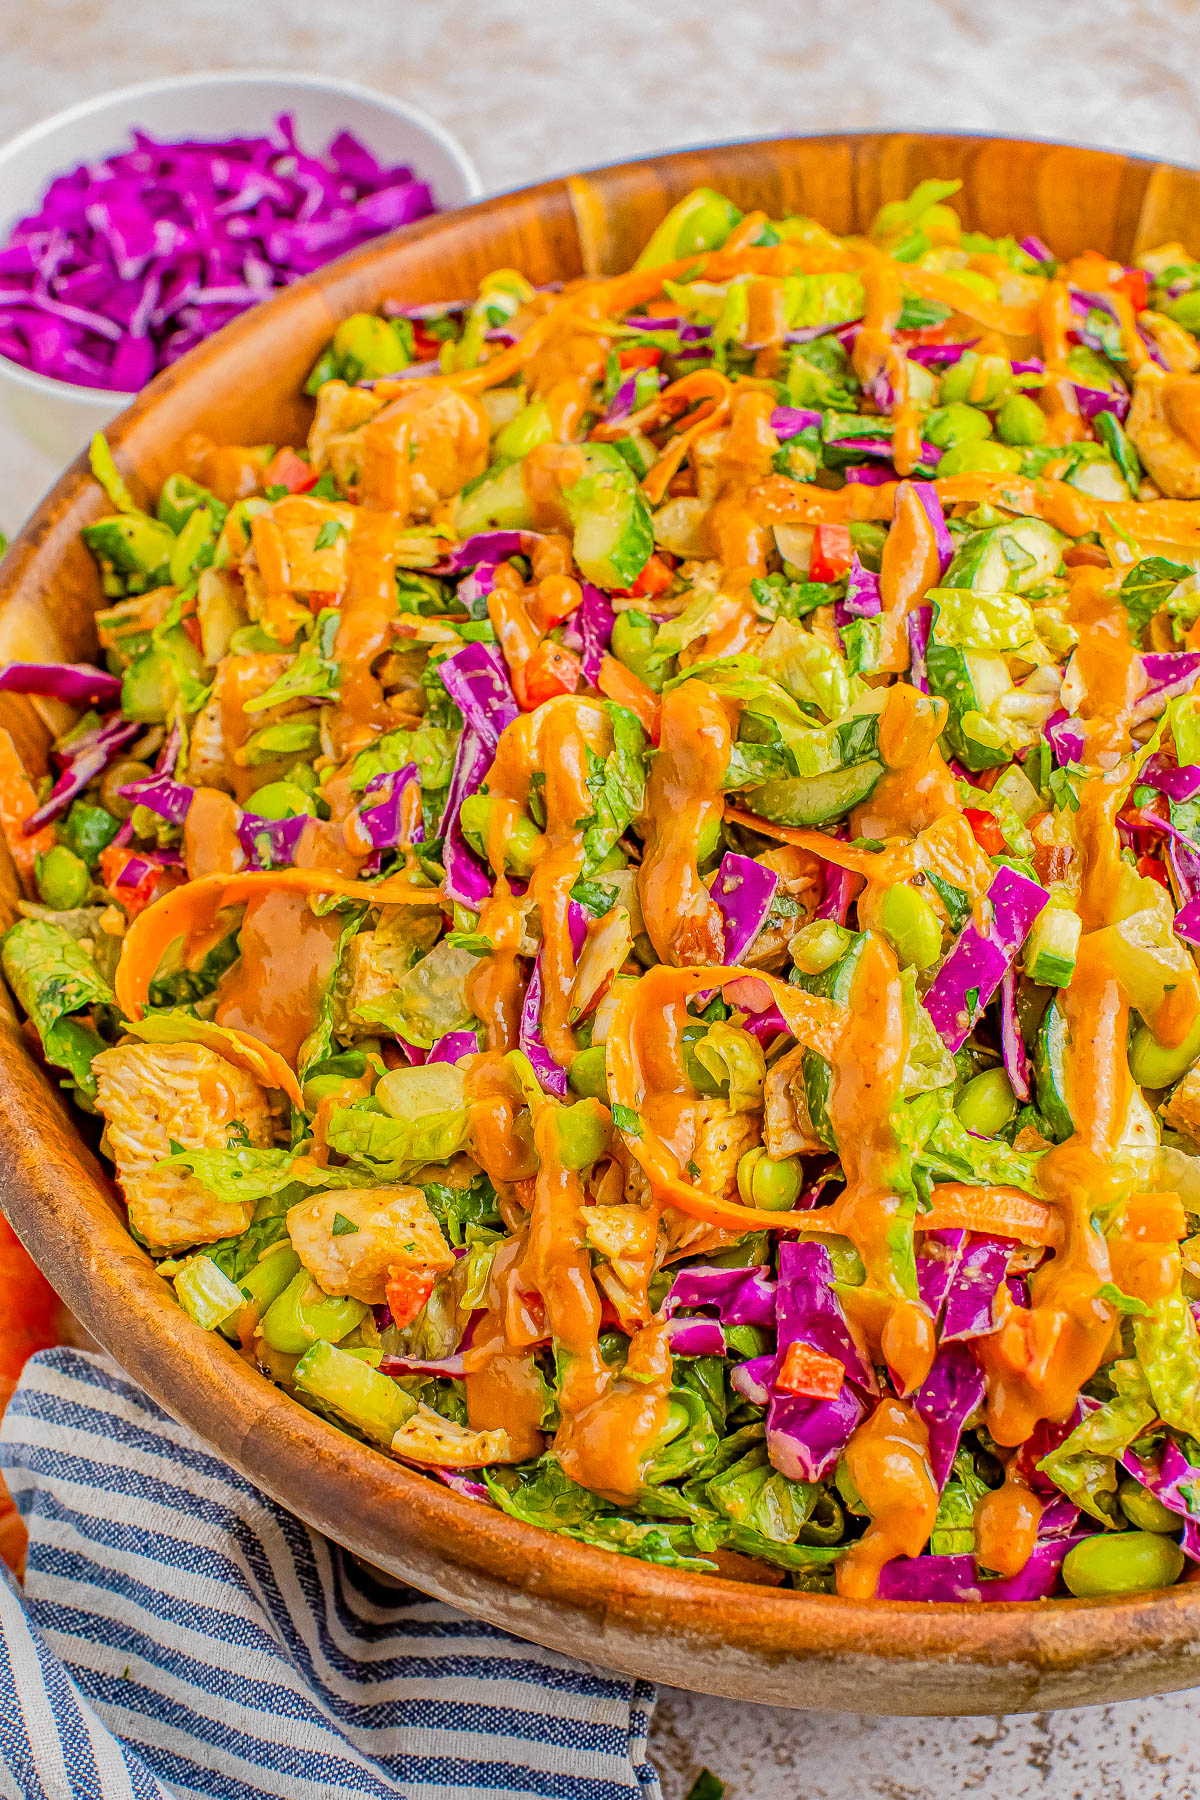 A close-up of a colorful salad in a wooden bowl, topped with a drizzle of creamy dressing. The salad includes red cabbage, edamame, and greens. A small bowl of shredded red cabbage is in the background.